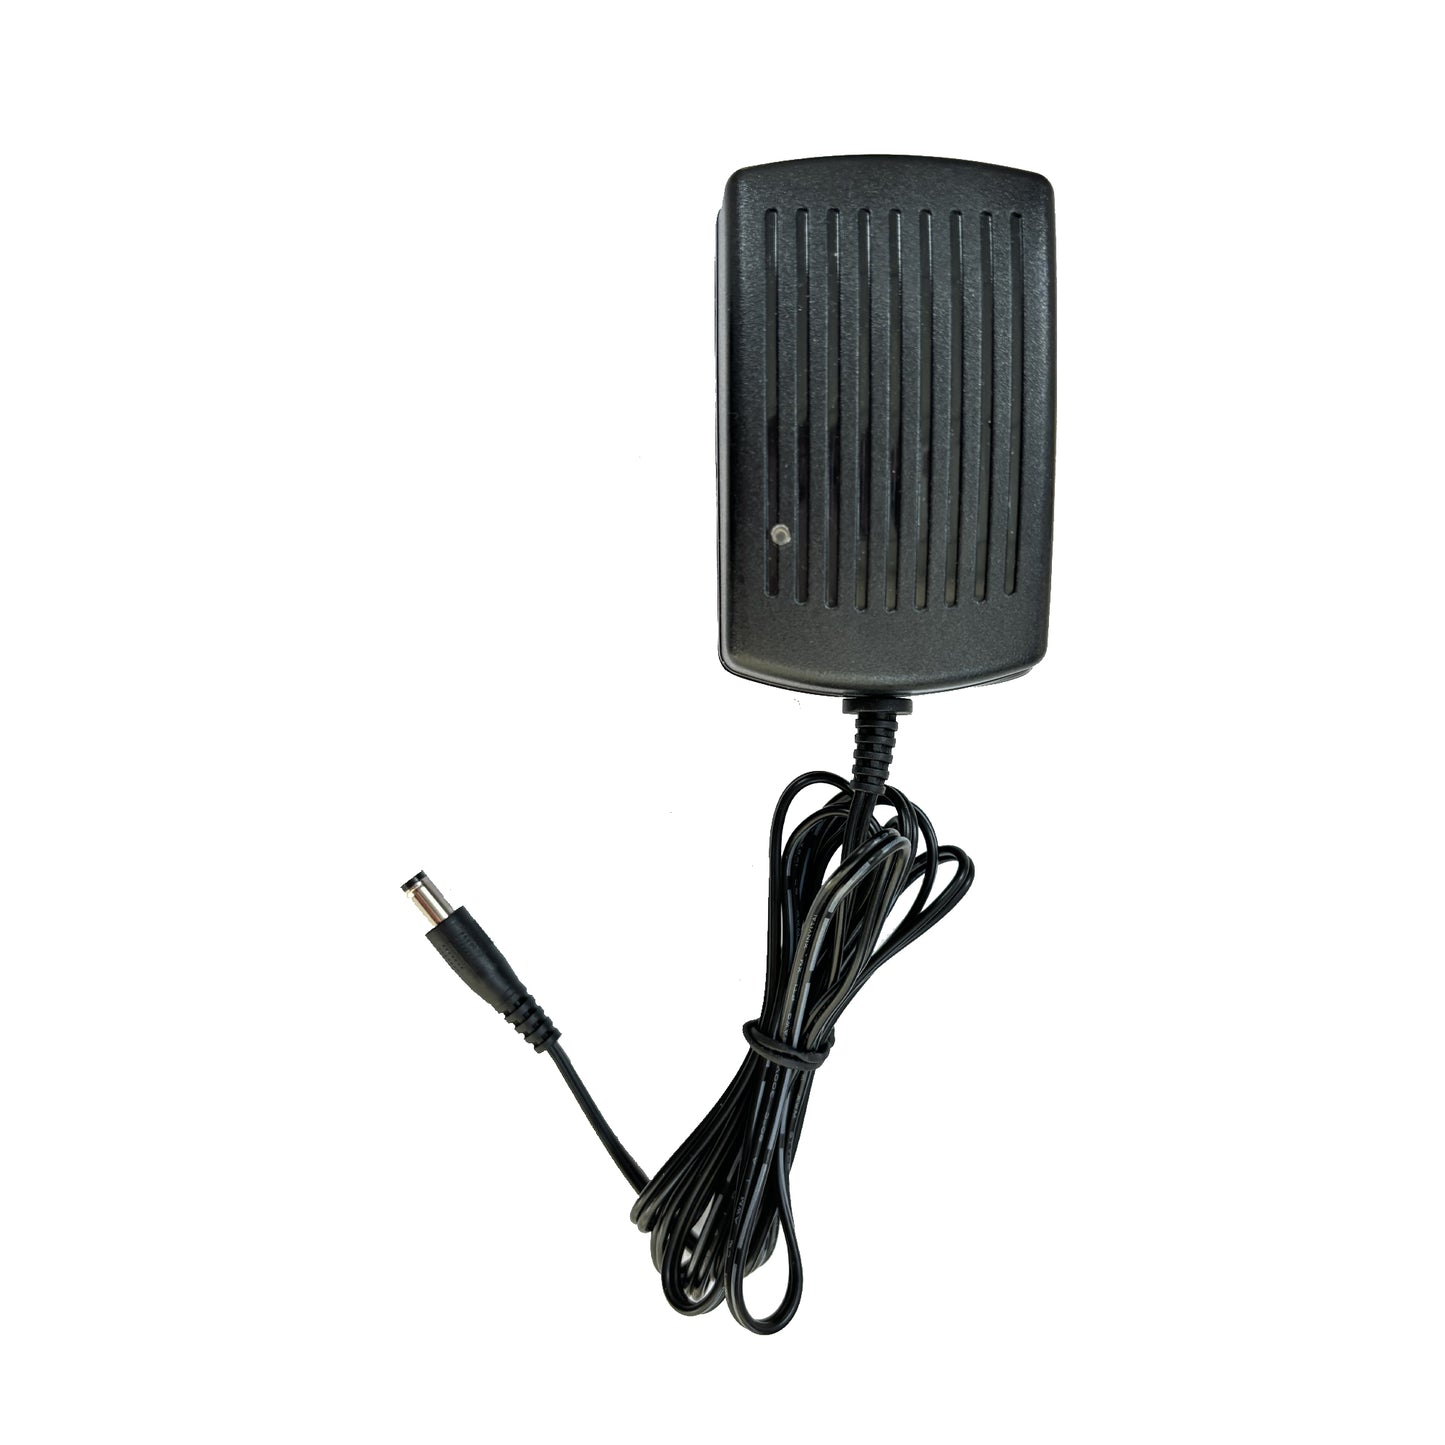 Charger for PATIOX Power Battery